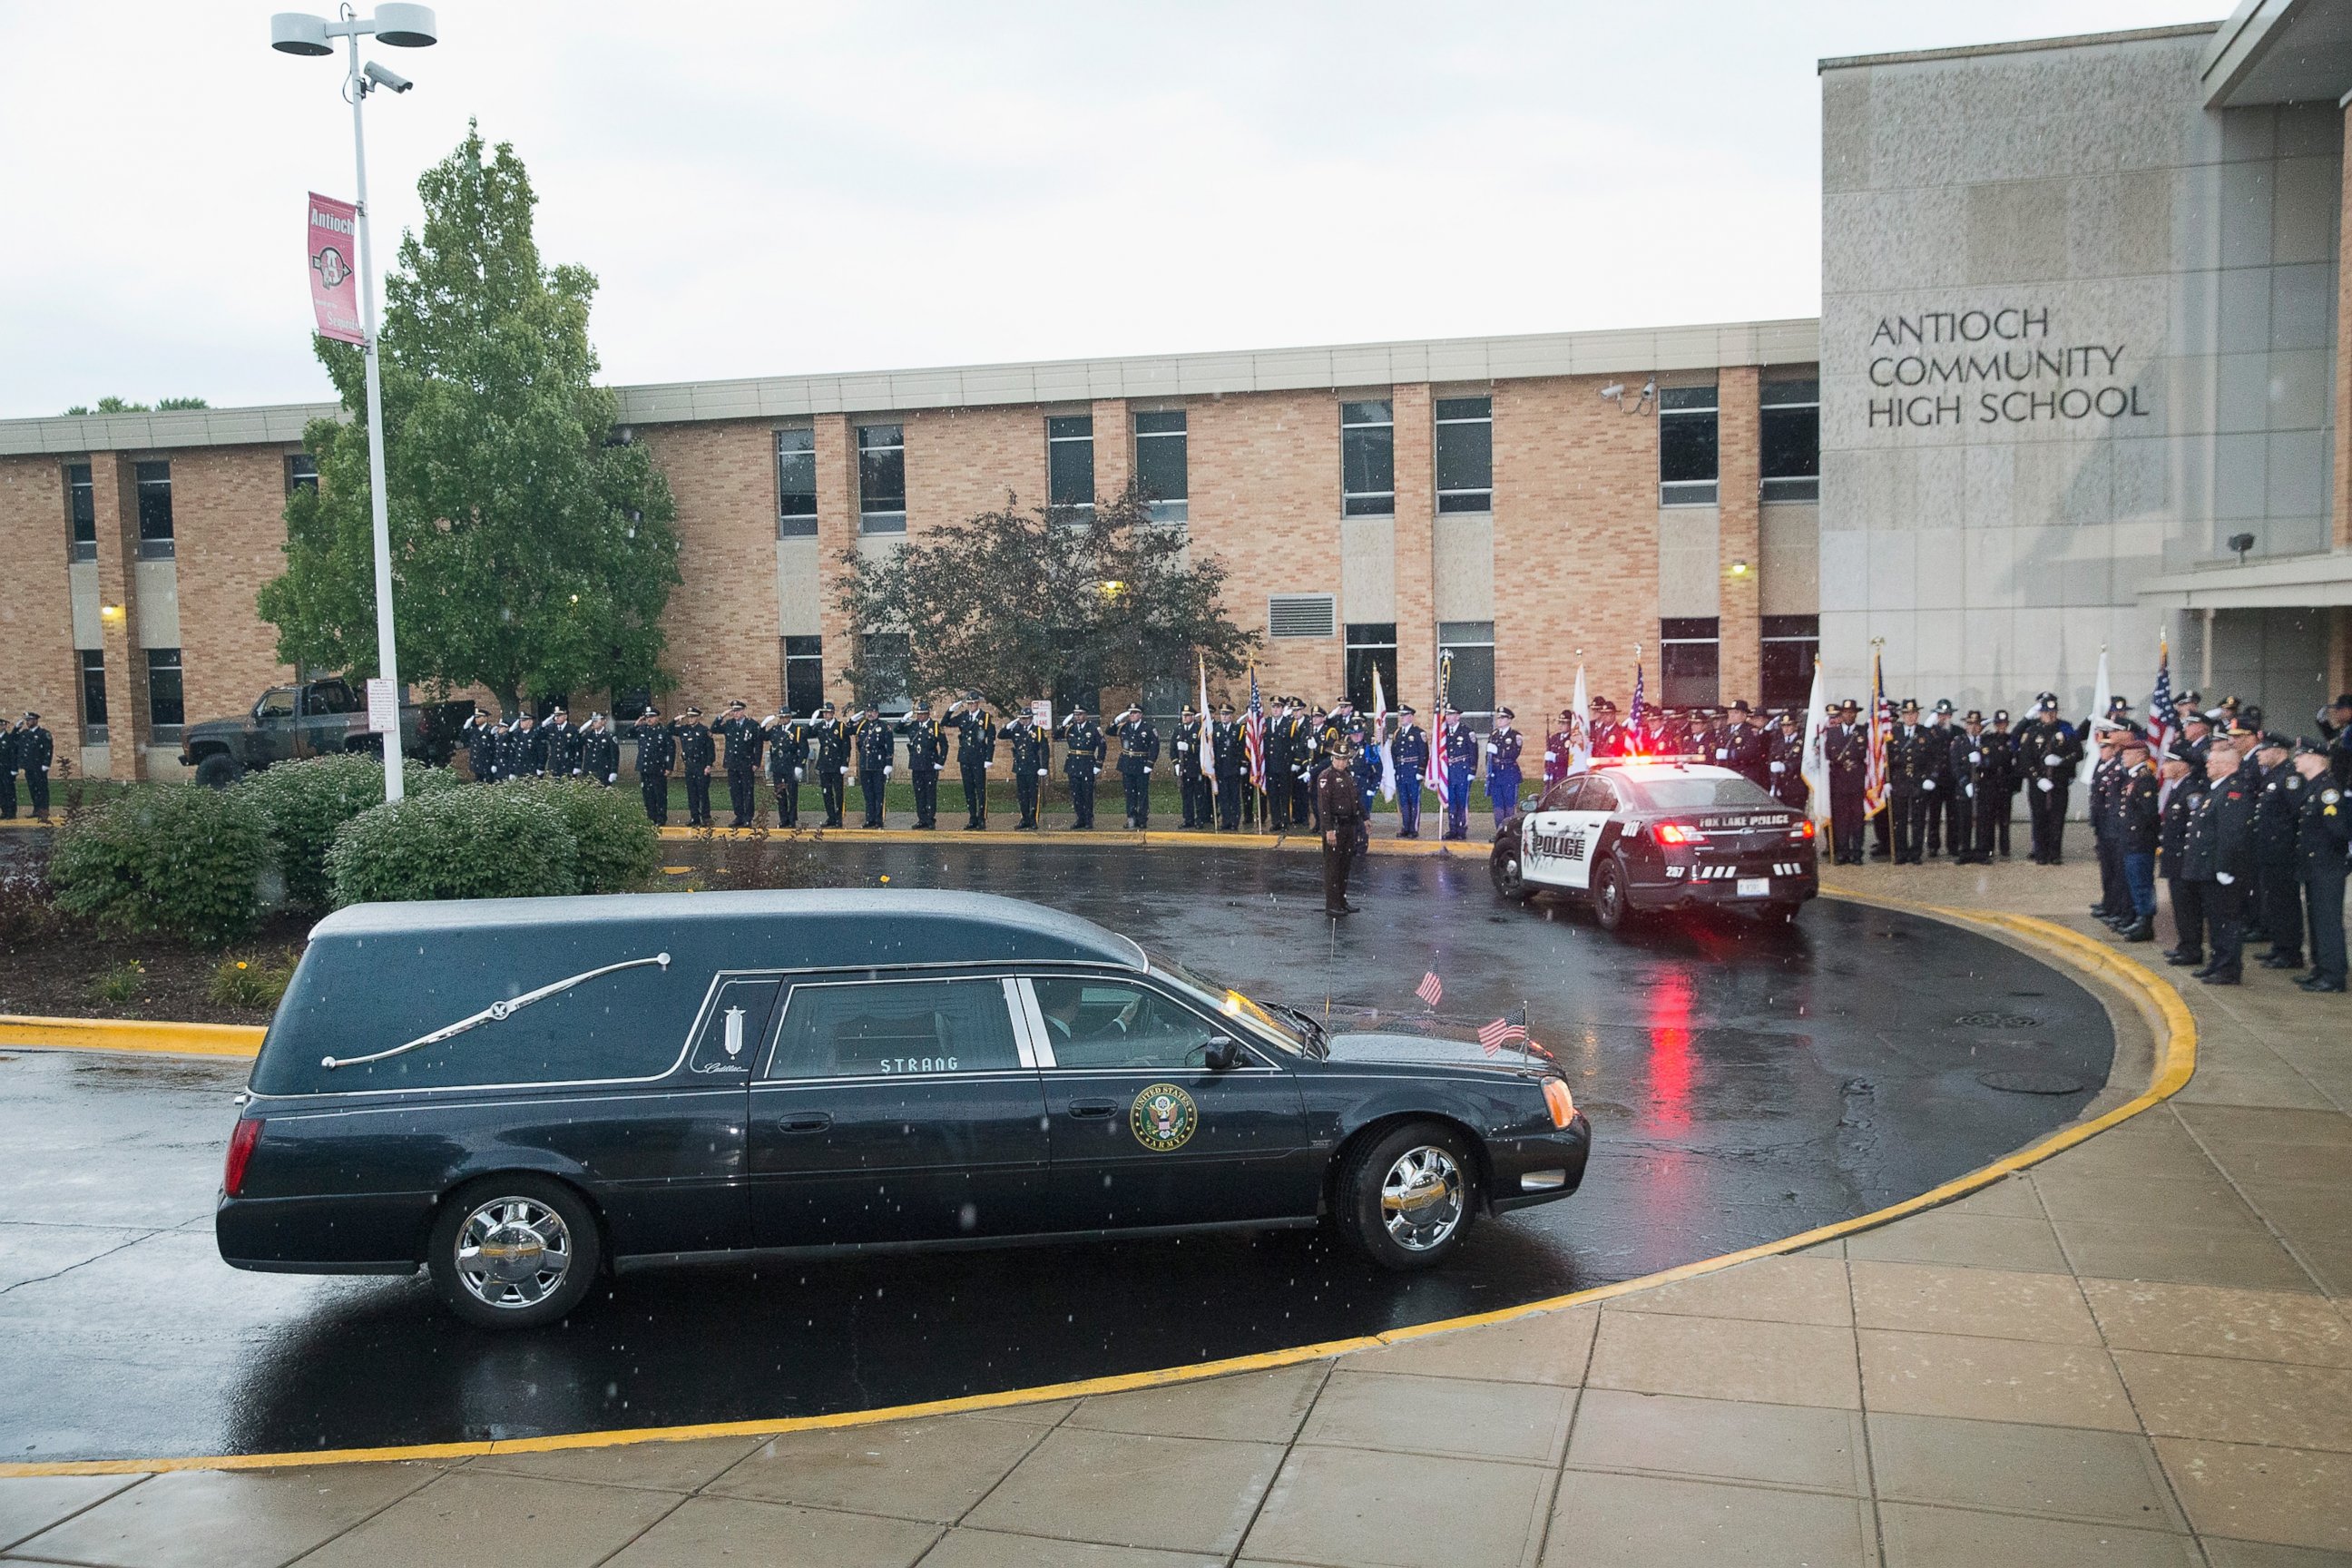 PHOTO: The coffin of slain Fox Lake police officer Lt. Joe Gliniewicz is brought to Antioch Community High School for his visitation and funeral service on Sept. 7, 2015.